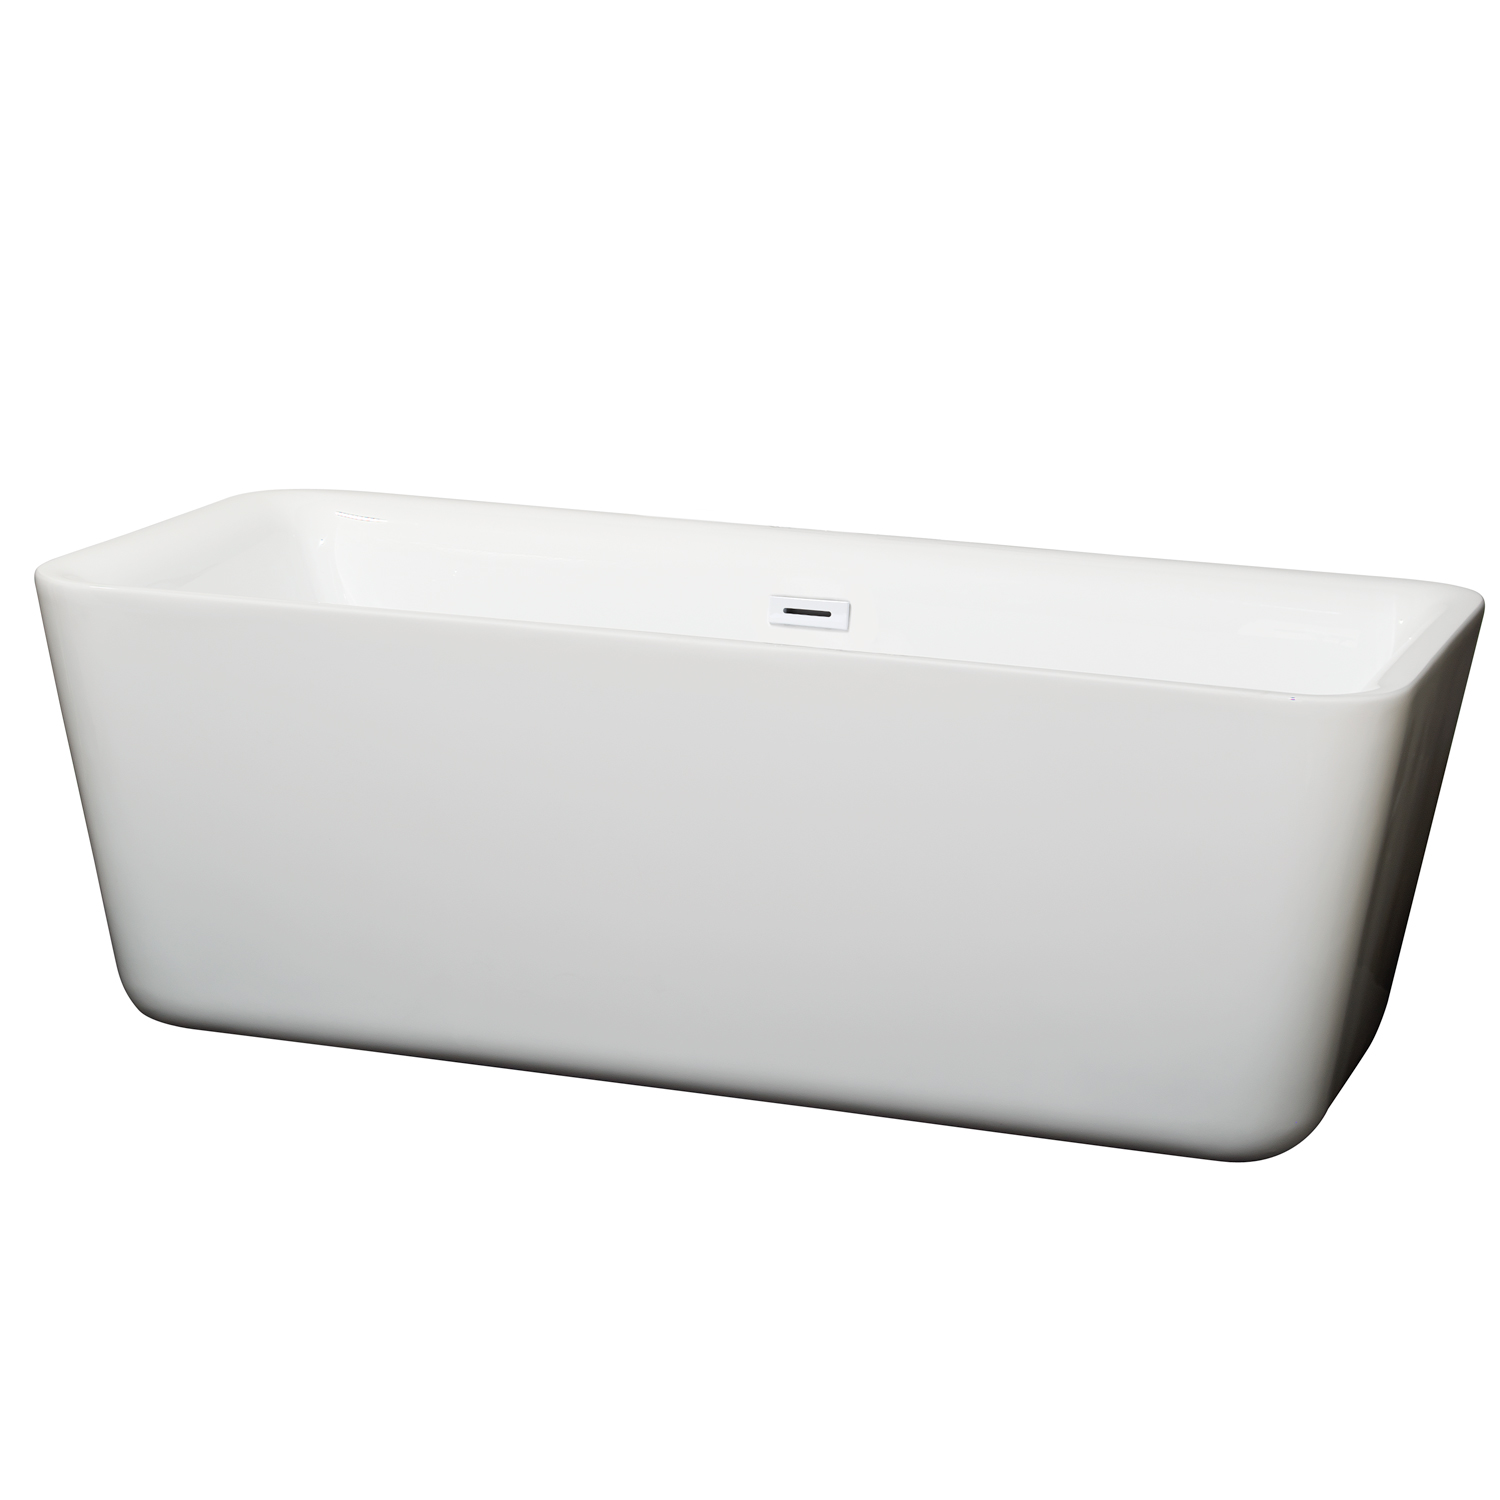 69" Freestanding Bathtub in White with Shiny White Drain and Overflow Trim